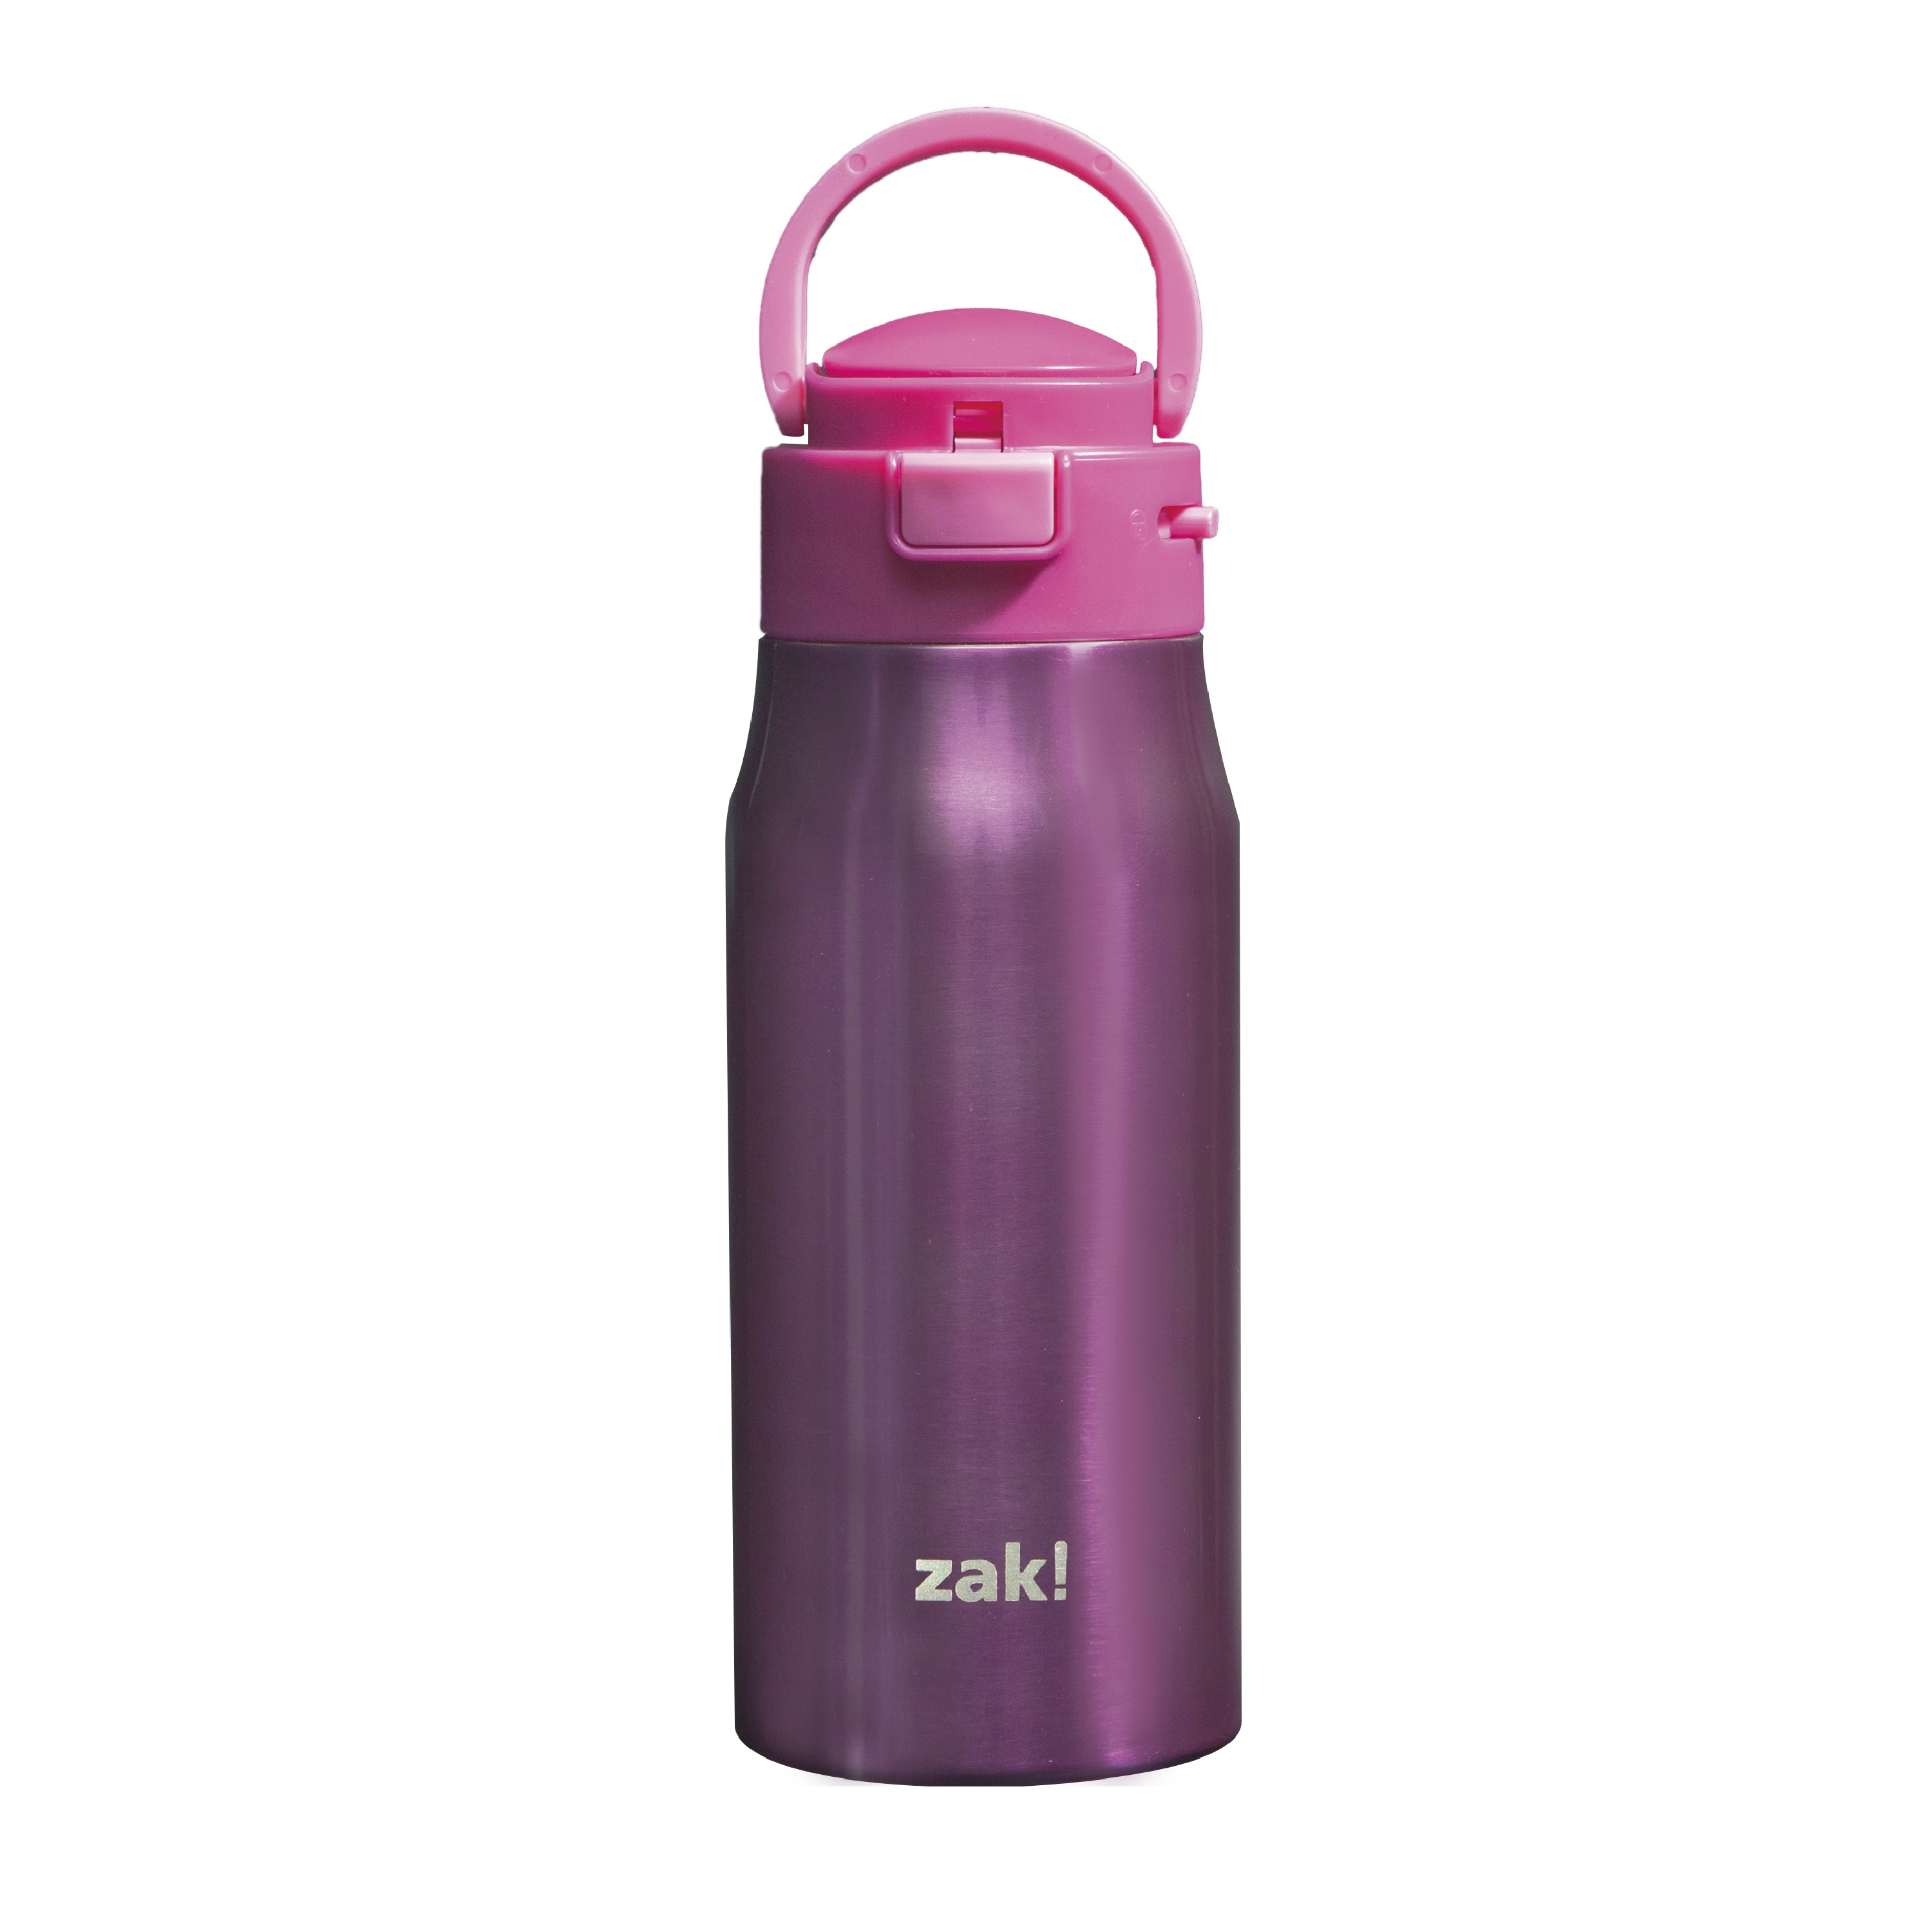 Mesa 13.5 ounce Double Wall Insulated Stainless Steel Water Bottle, Pink slideshow image 2